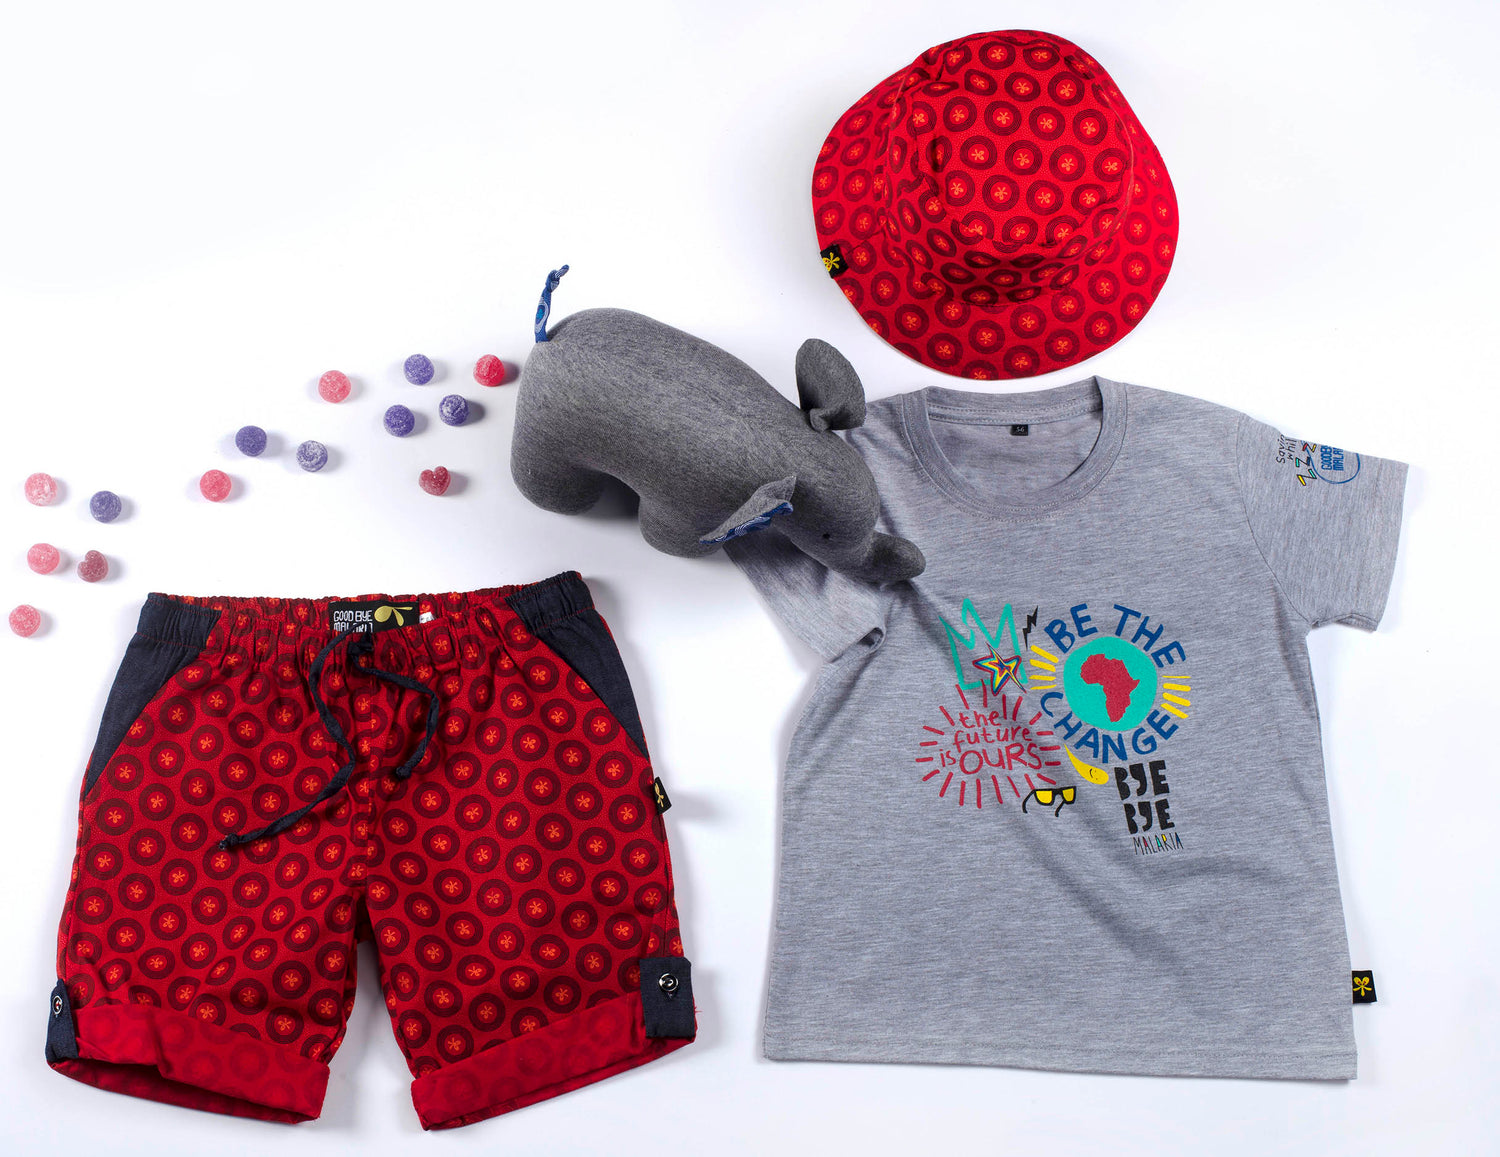 Kiddies T-shirt "Be the Change" Gift Idea with Shweswhe Bucket Hat, Shorts and Plush Toy.